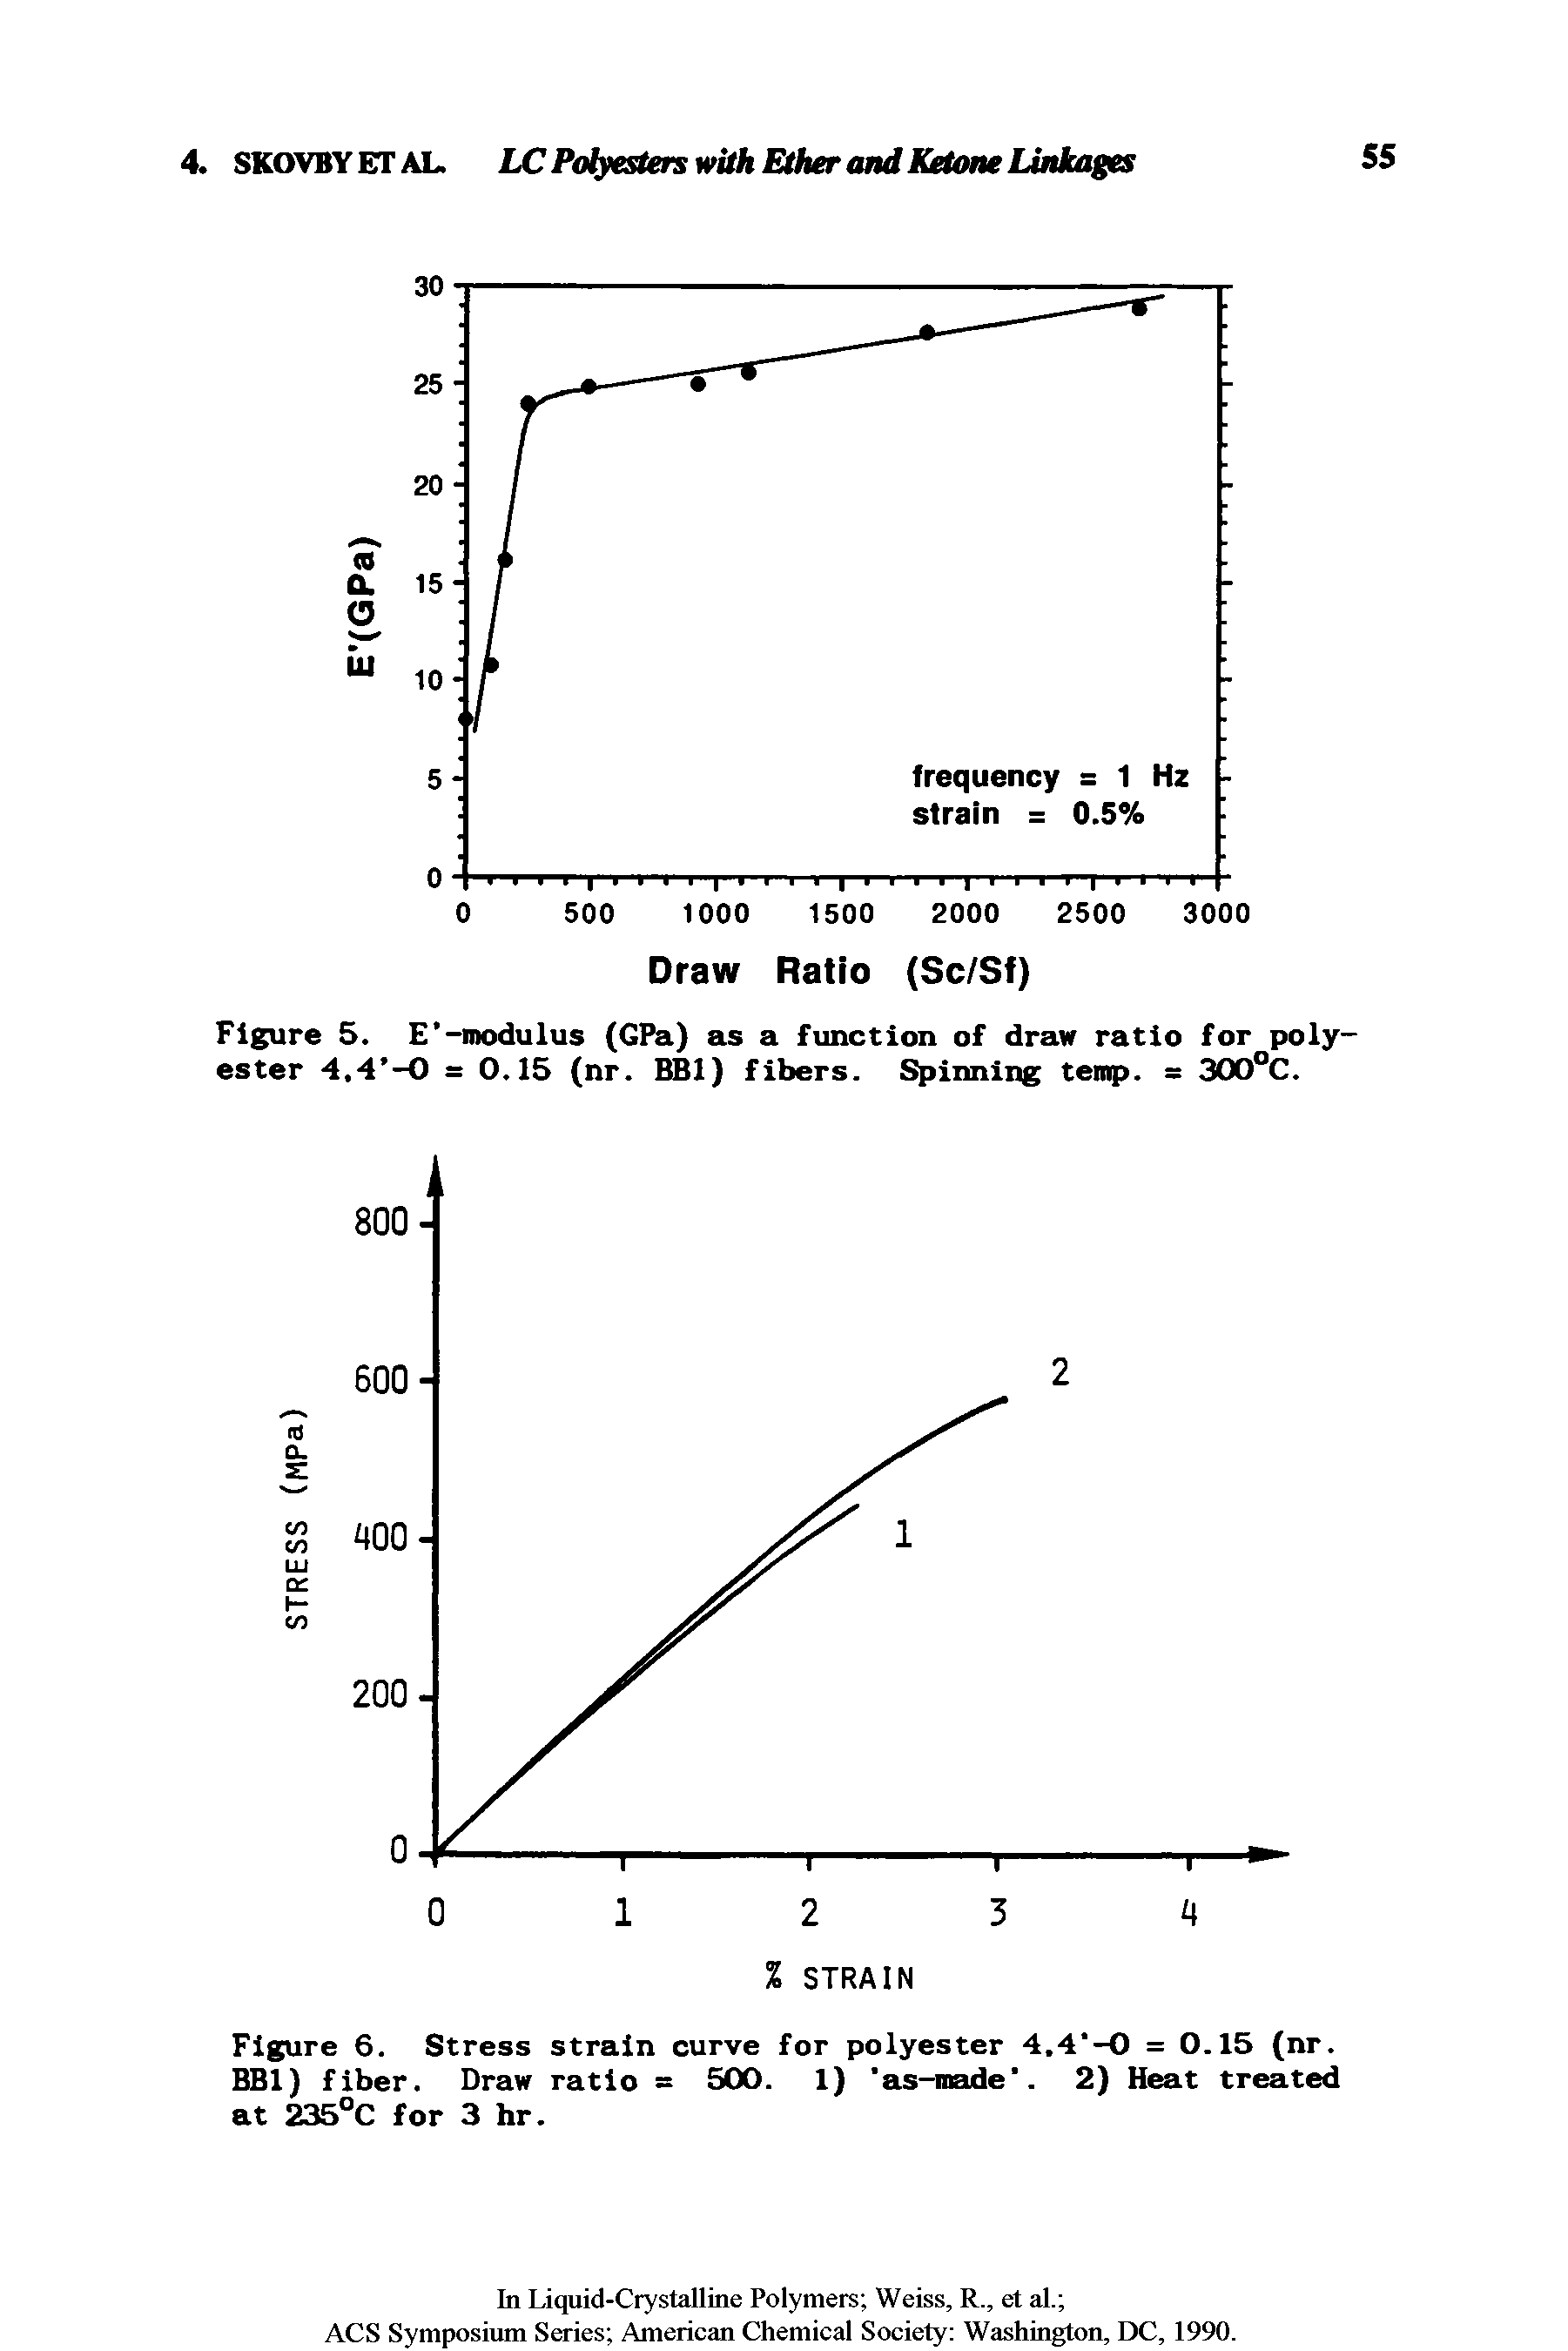 Figure 6. Stress strain curve for polyester 4.4 -0 = 0.15 (nr. BB1) fiber. Draw ratio = 500. 1) as-made. 2) Heat treated at 235°C for 3 hr.